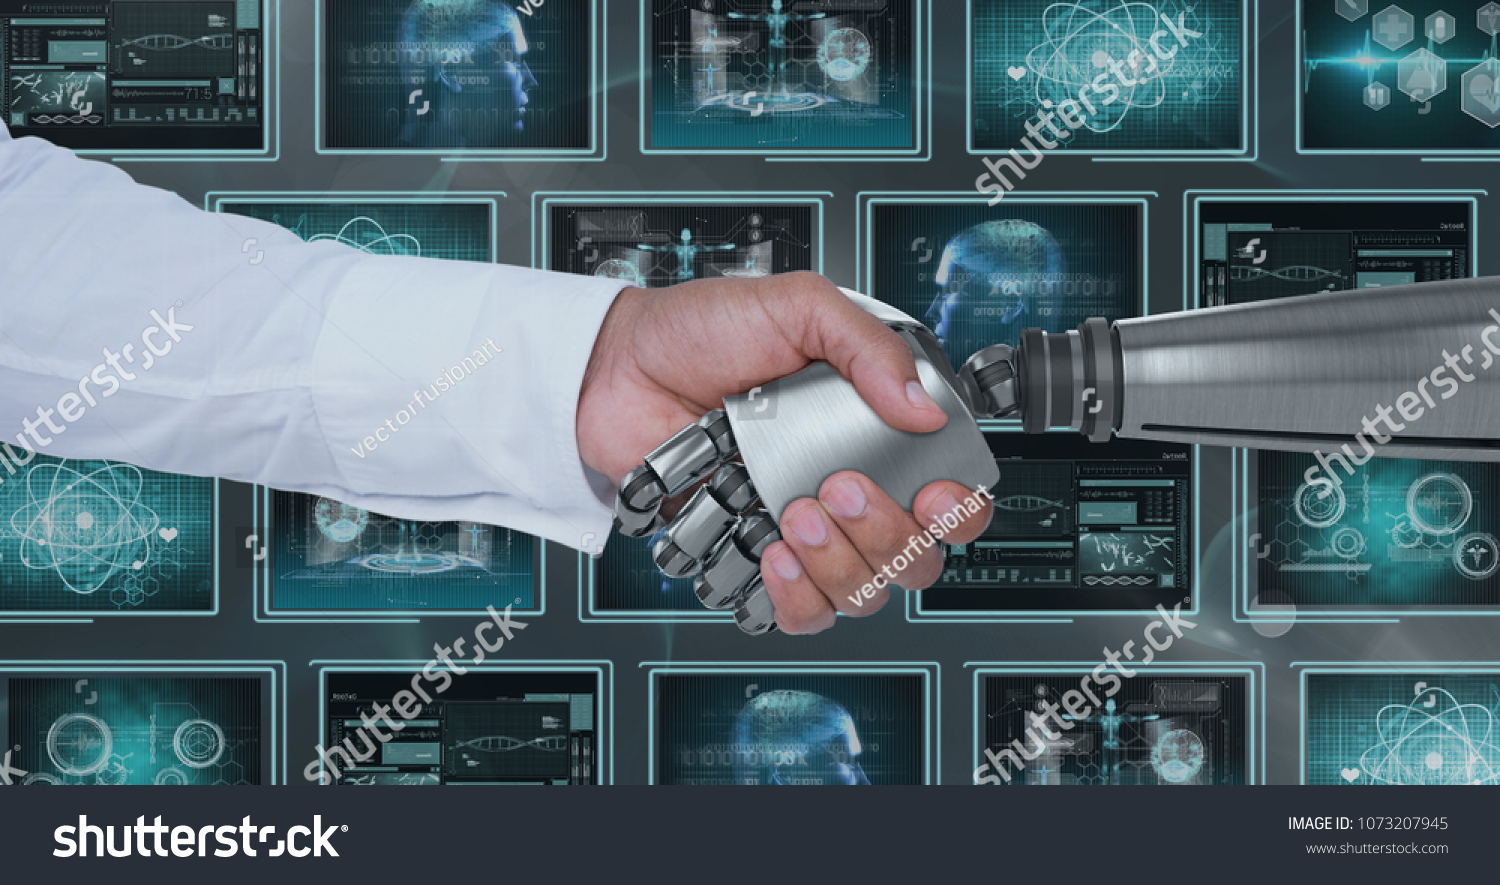 3D robot hand and person shaking hands against background with medical interfaces #1073207945